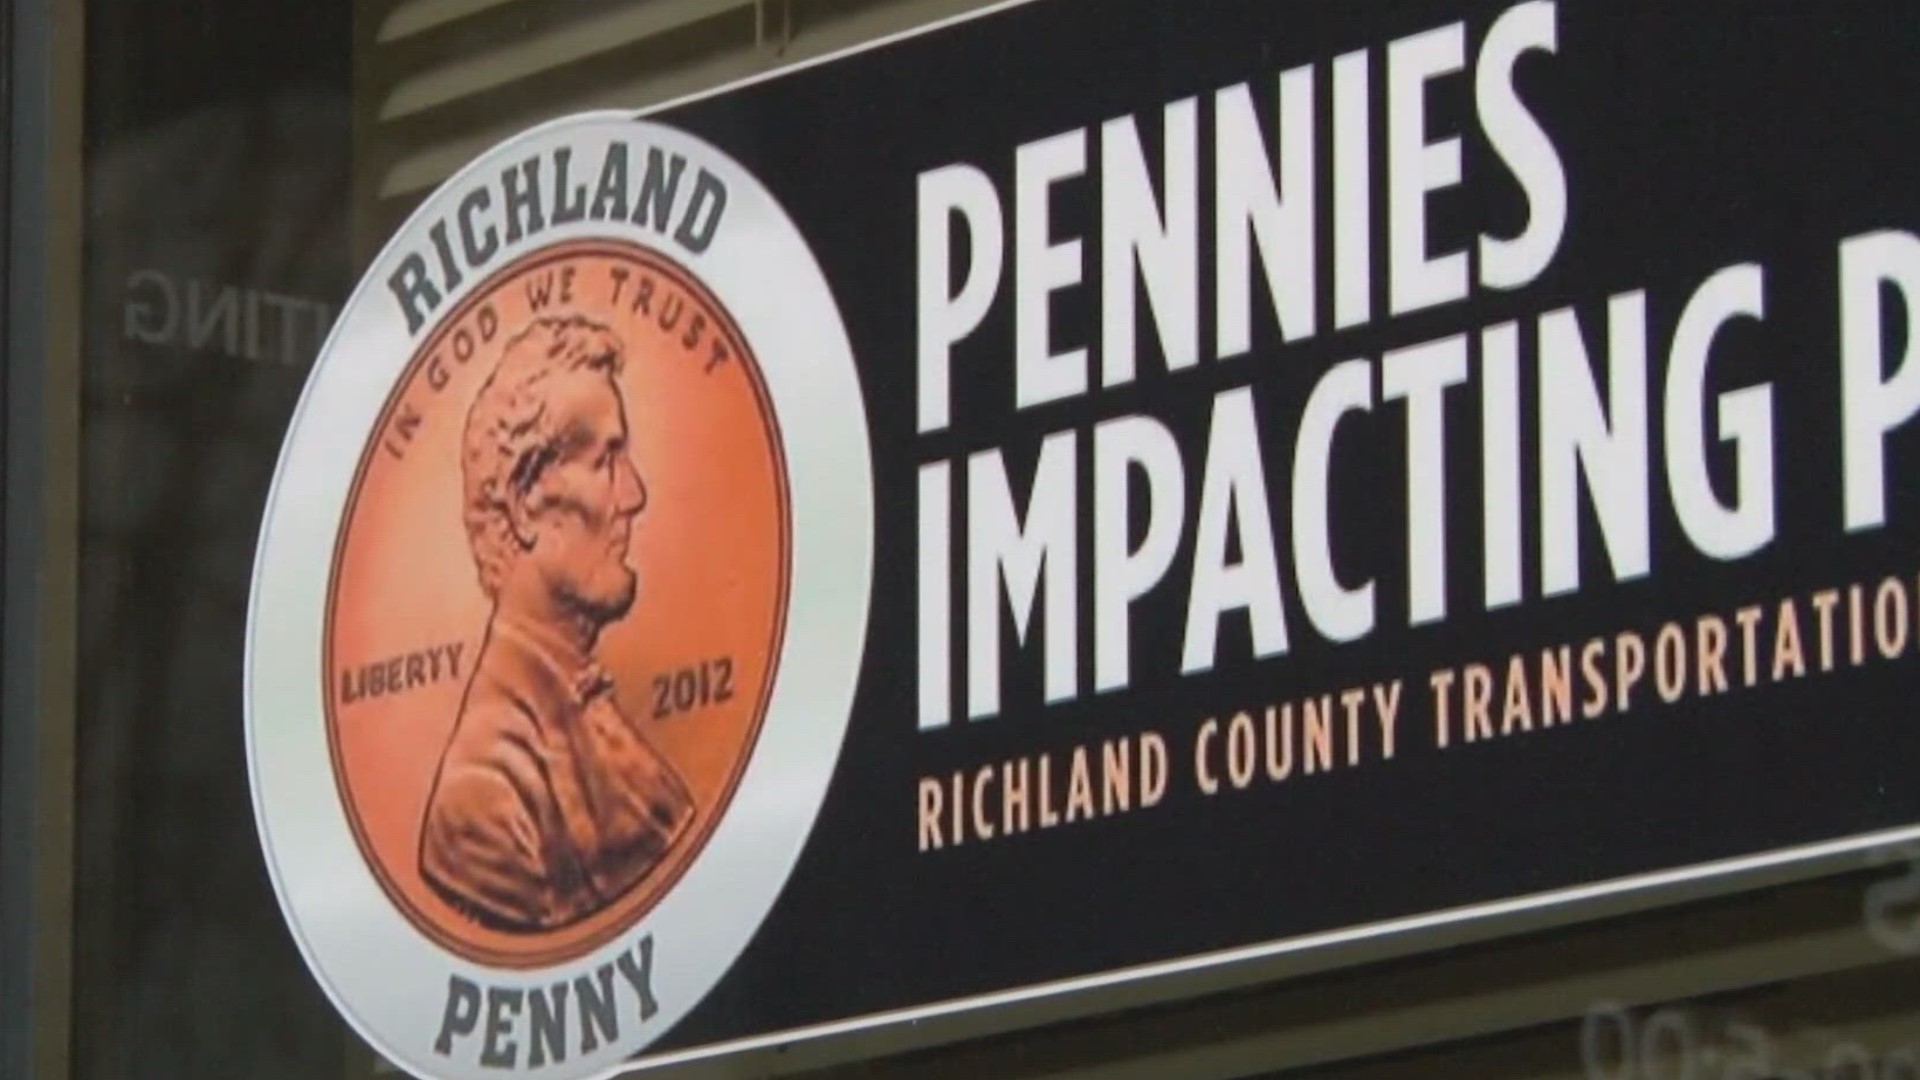 According to Richland County, the Penny Tax program is going better than expected, bringing in more money than the county had originally projected.